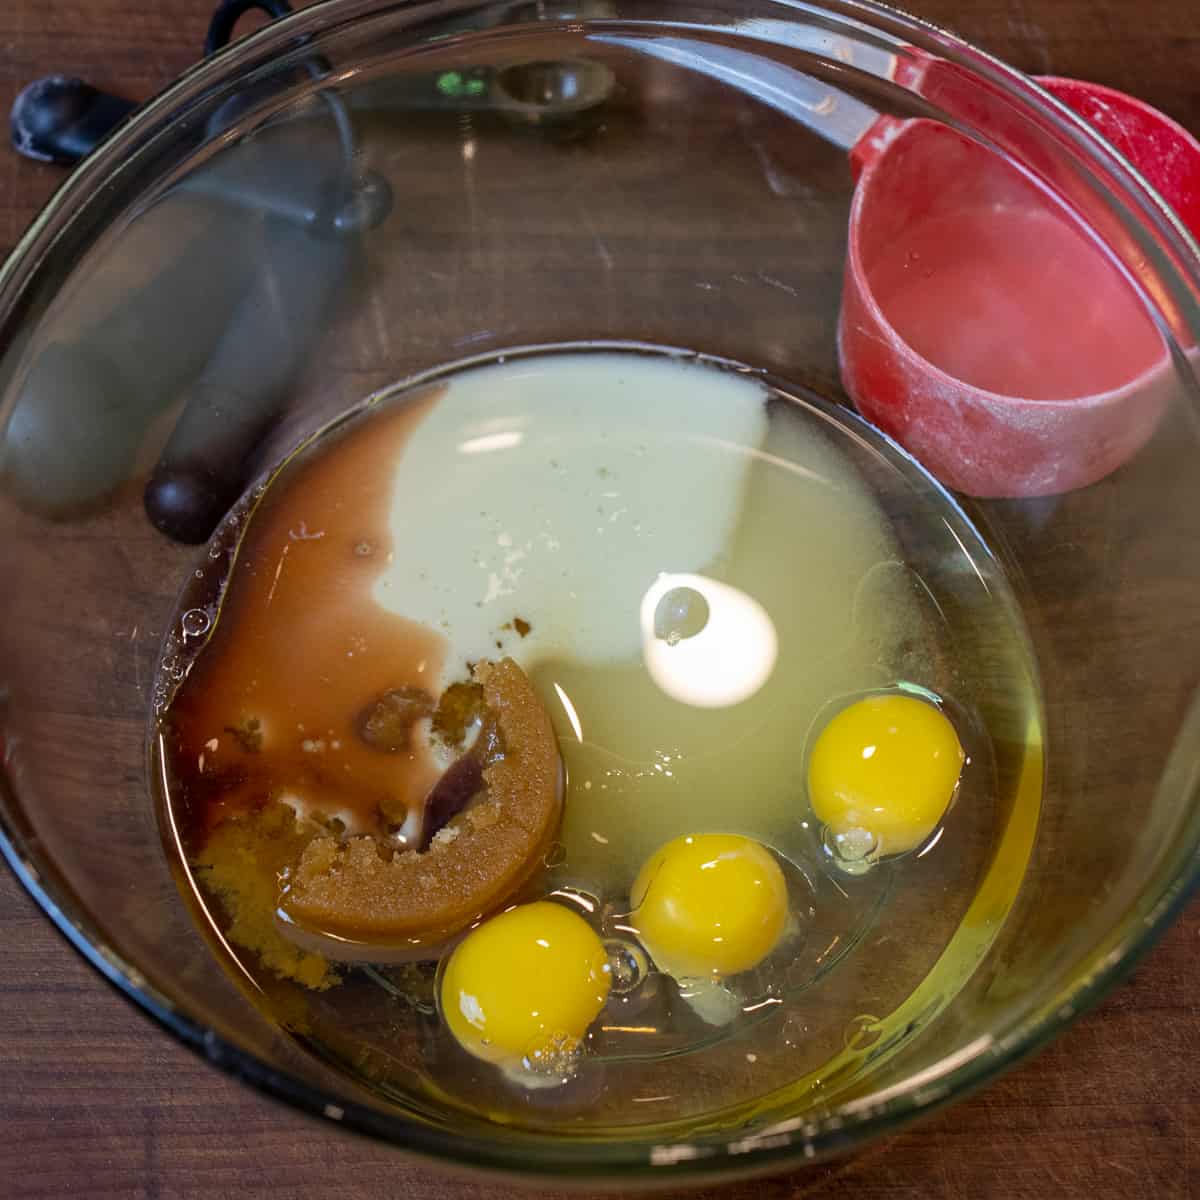 Eggs, oil and sugars in a glass bowl.